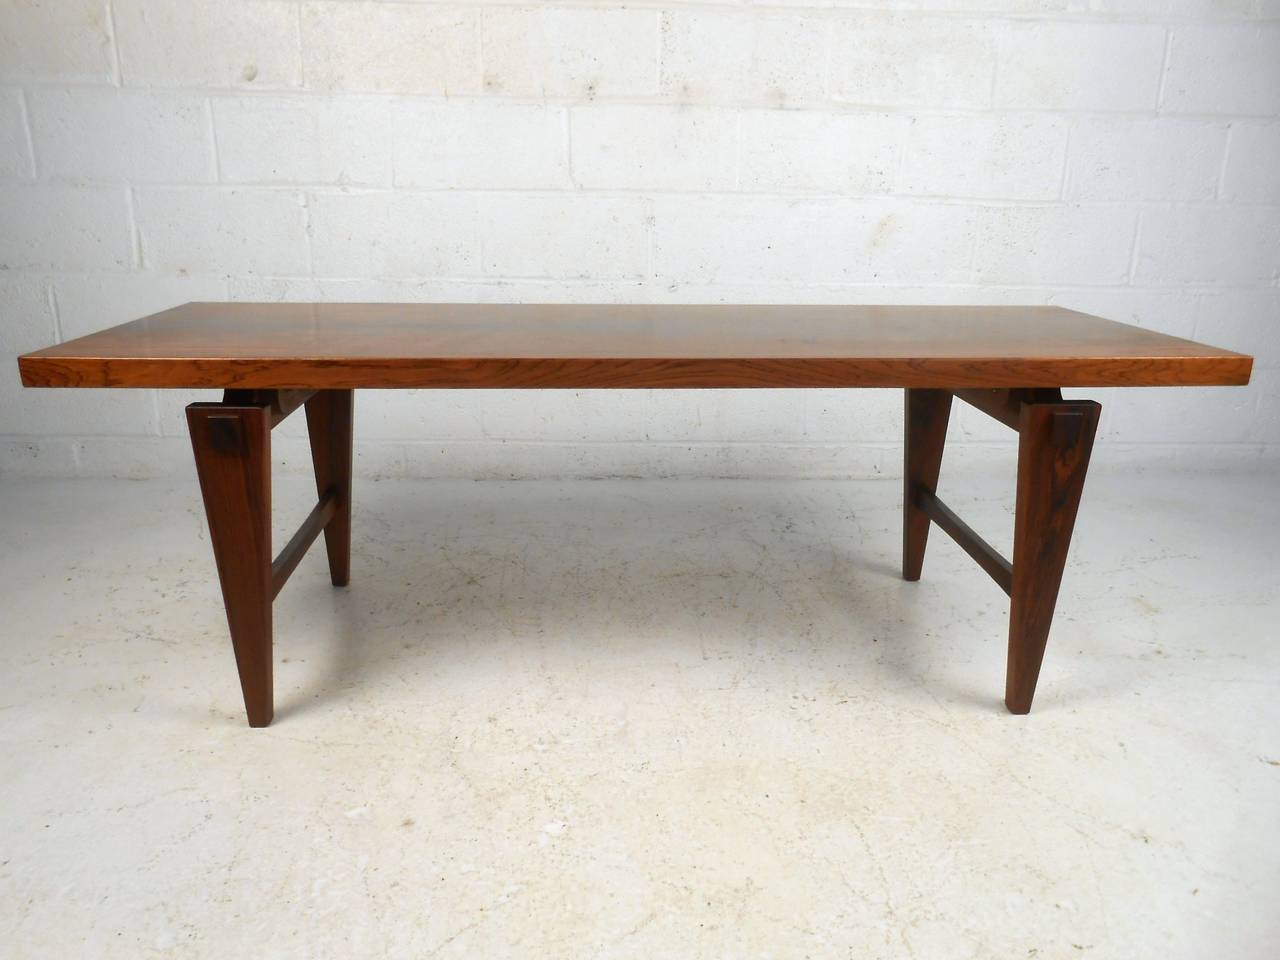 This beautiful vintage rosewood coffee table boasts a lovely rosewood veneer, tapered legs, and quality stretchers for added stability and detail. Please confirm item location (NY or NJ).